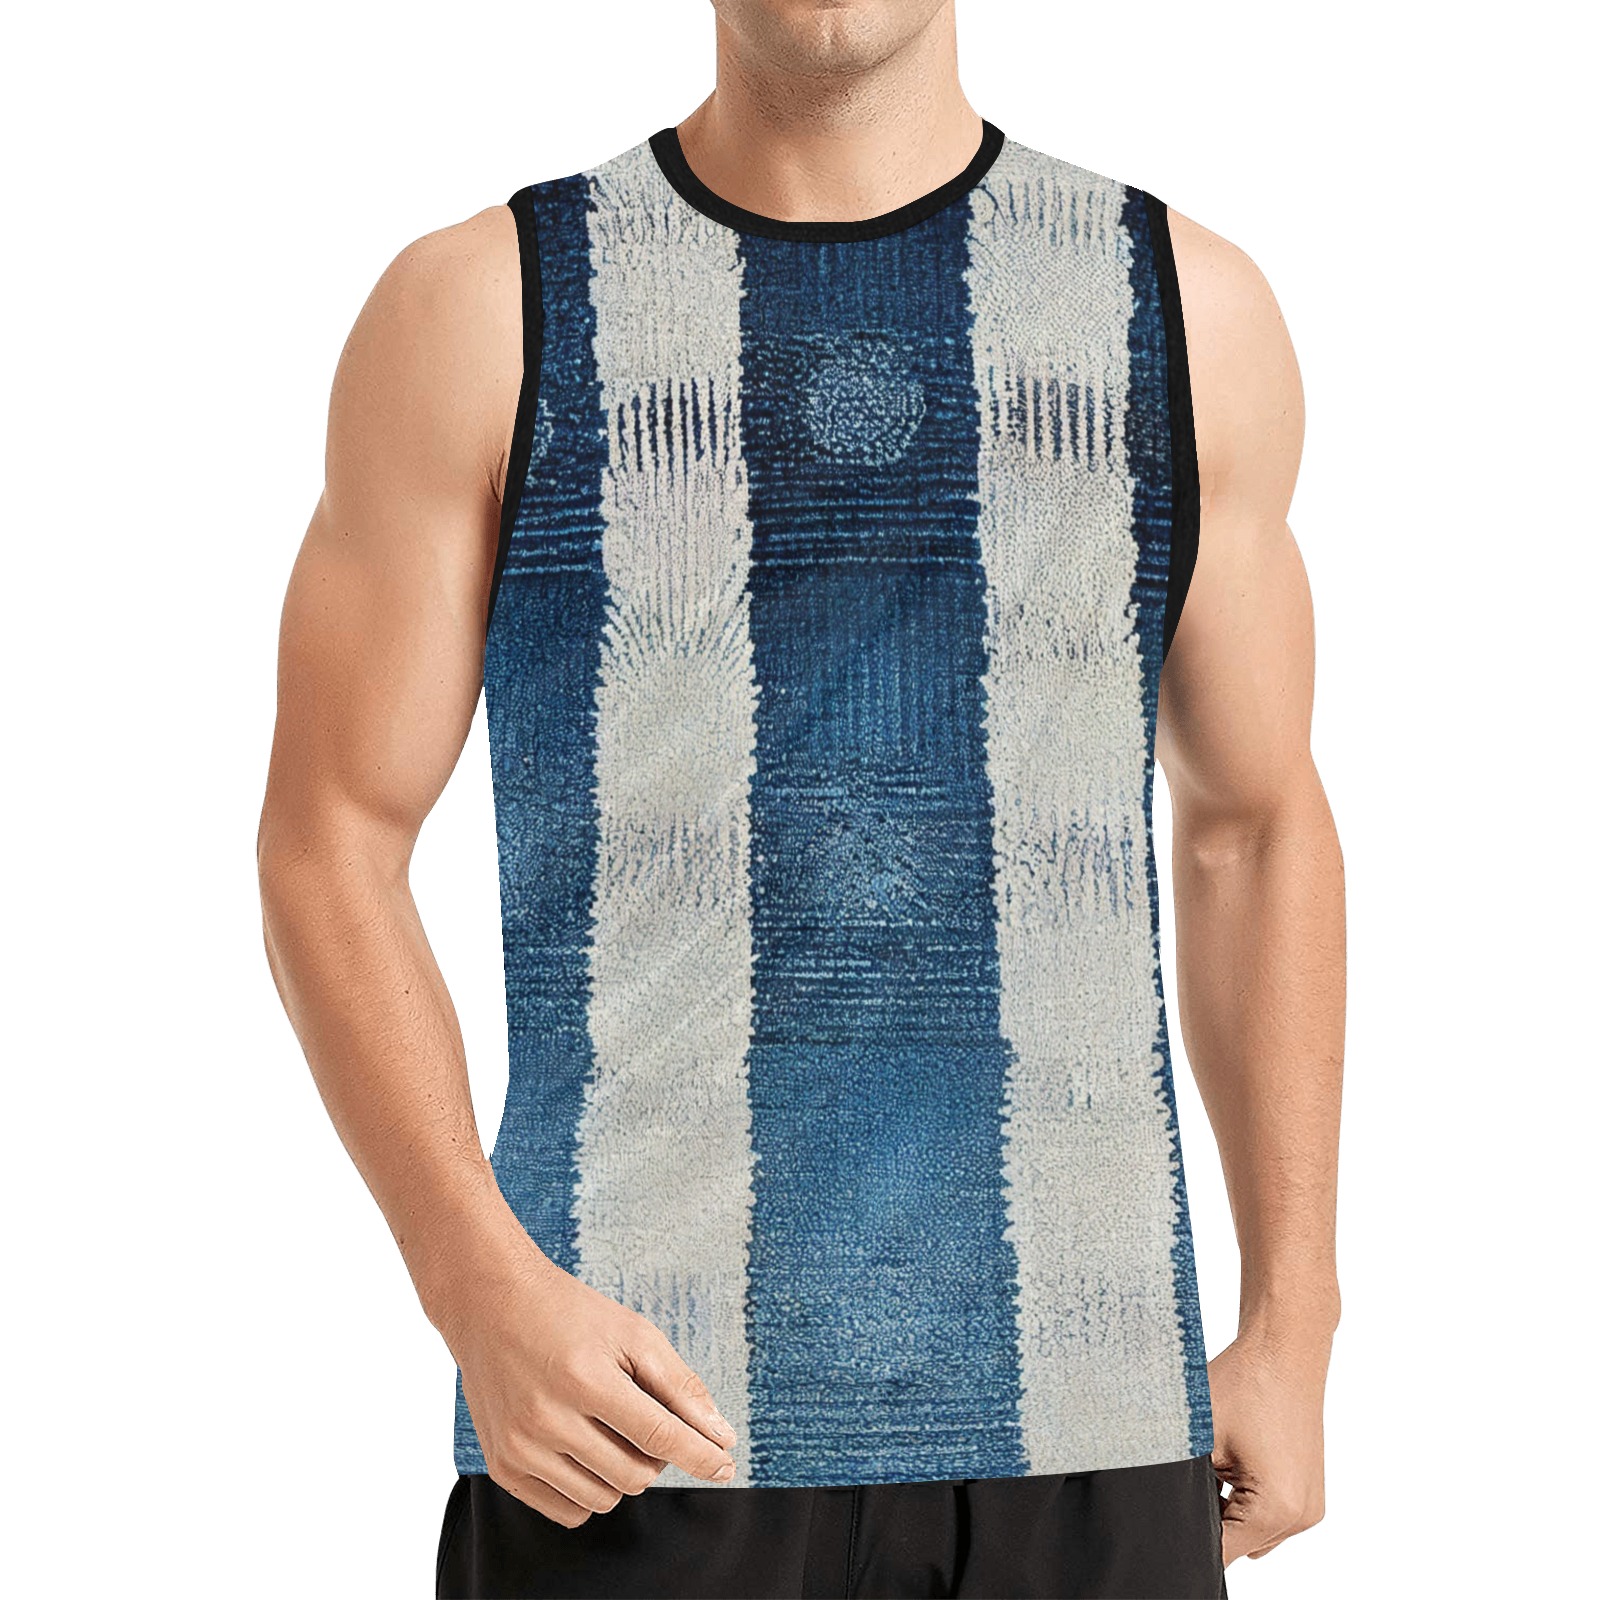 vertical striped pattern, blue and white All Over Print Basketball Jersey